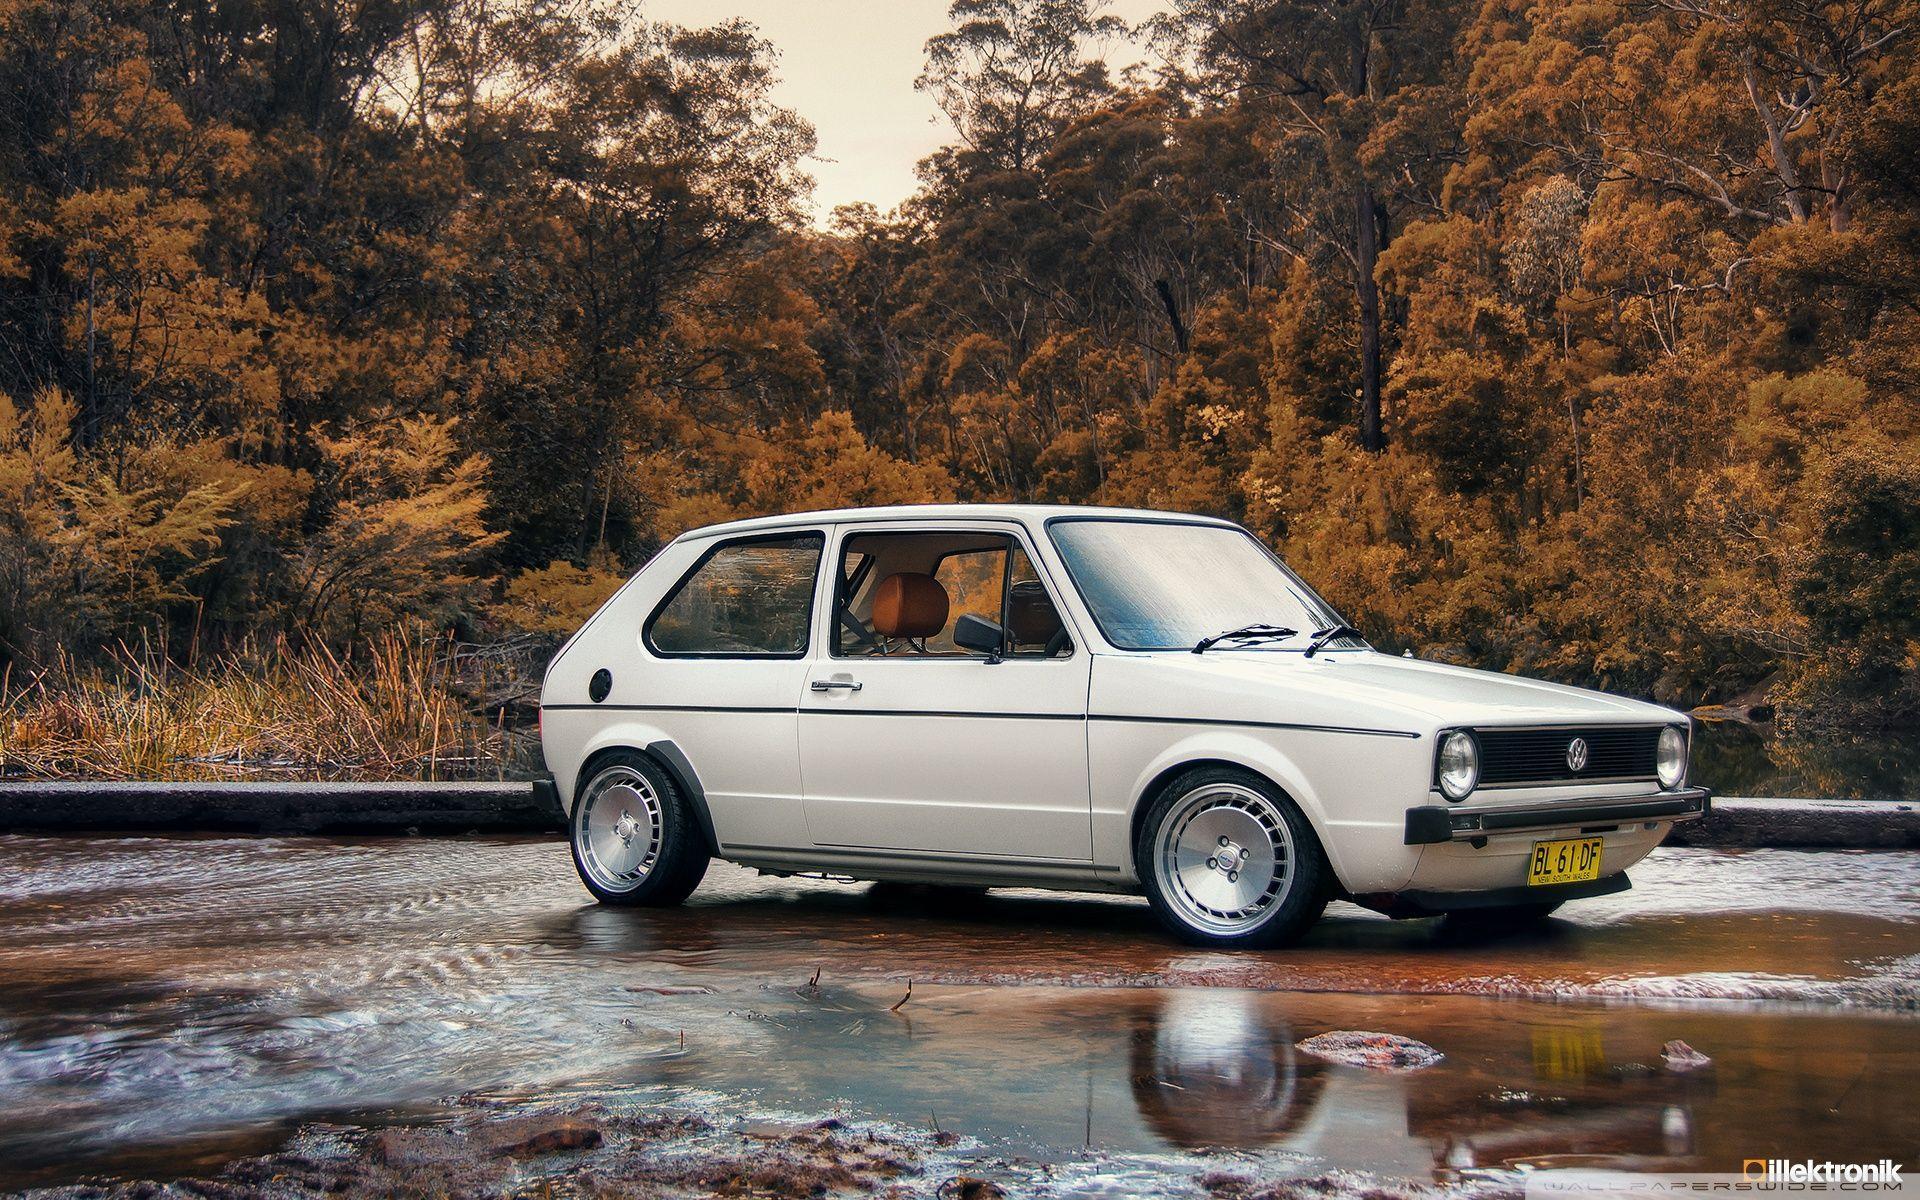 706 Old Vw Golf Images Stock Photos  Vectors  Shutterstock